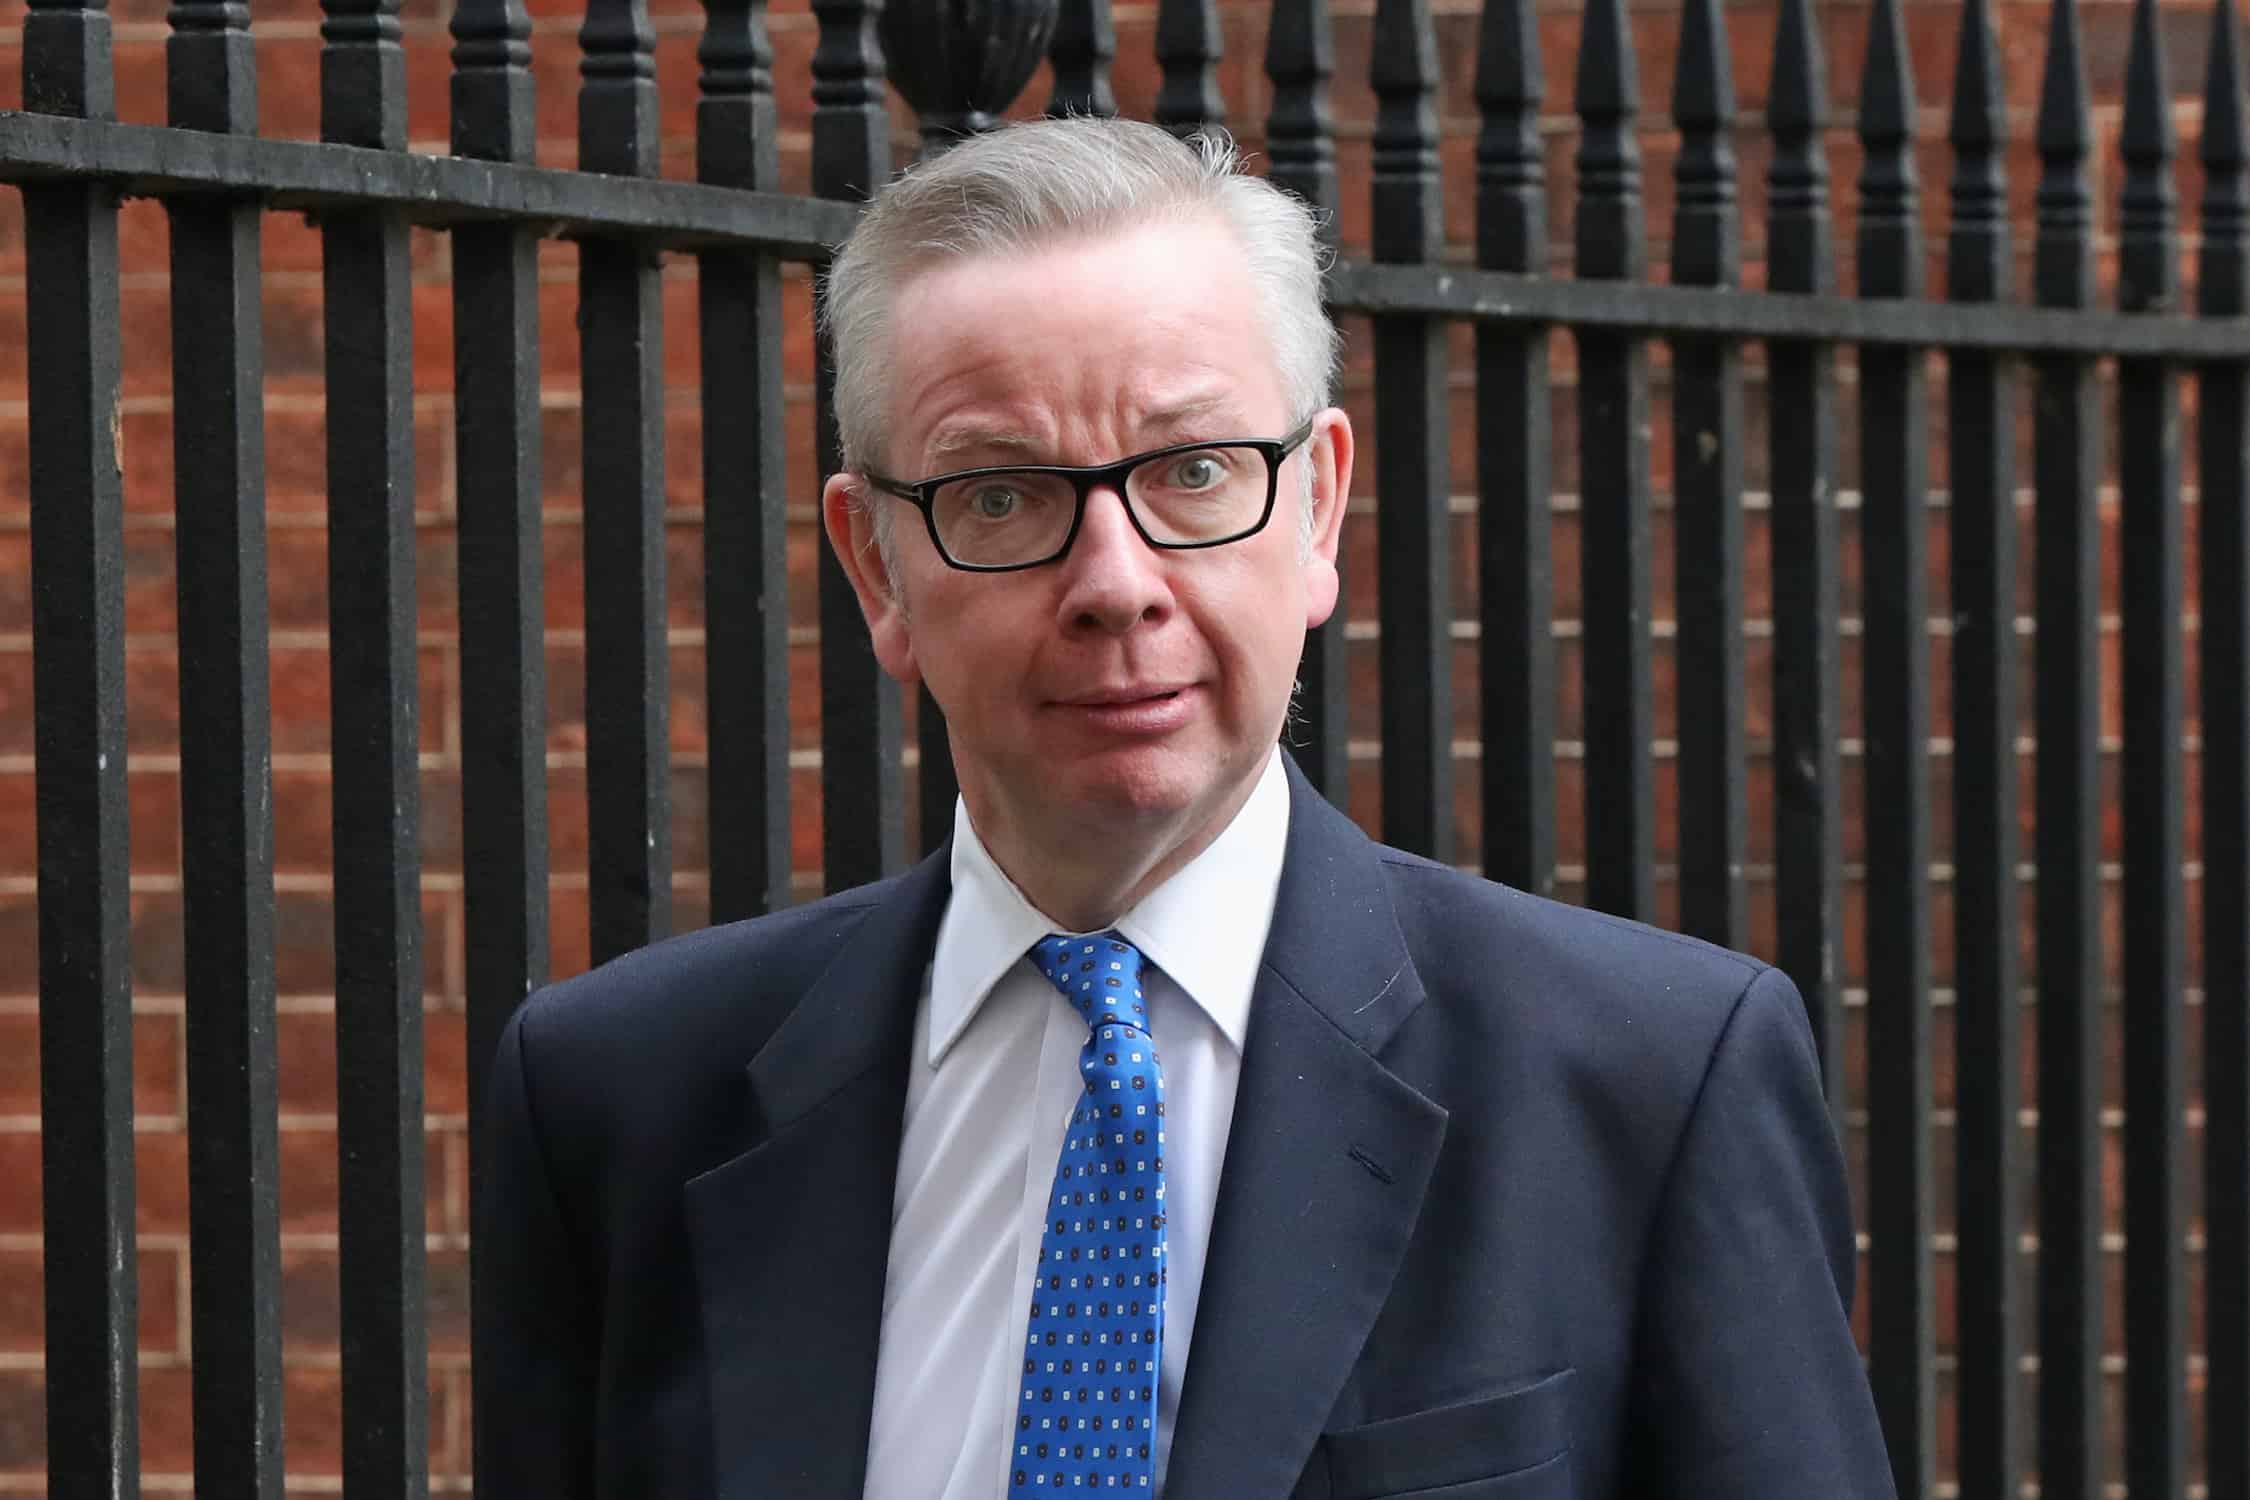 Michael Gove criticised for ‘silly voices’ as families ‘struggle to survive’